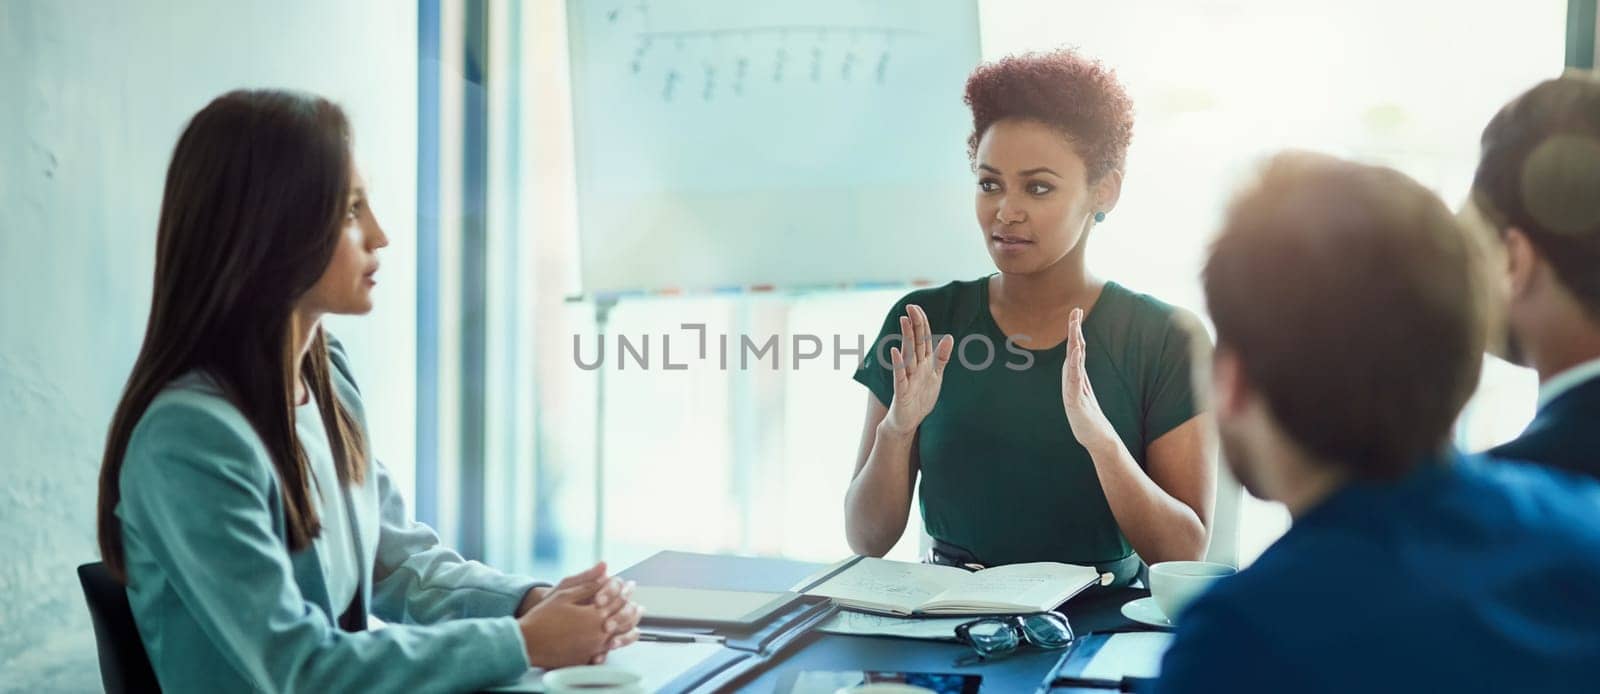 Business people, corporate and woman in a meeting, planning and brainstorming with conversation. Staff, professional or coworkers with ideas or collaboration with teamwork and accountant with project.